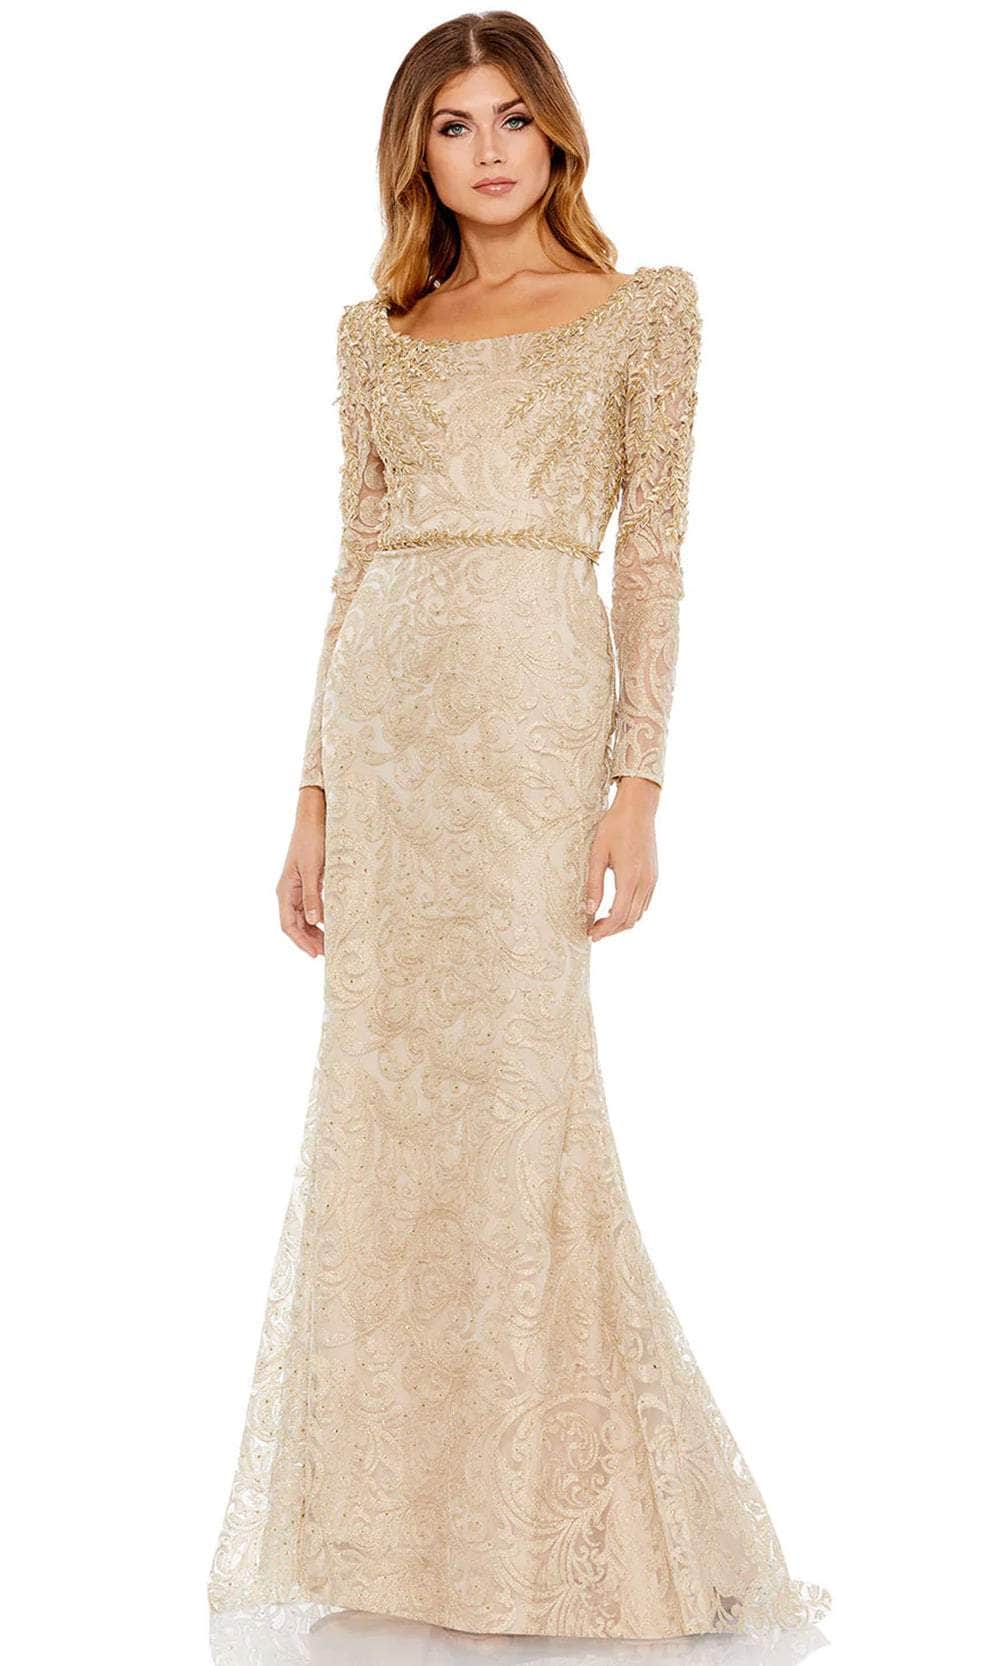 Image of Mac Duggal 11187 - Gold Leaf Appliqued Evening Gown